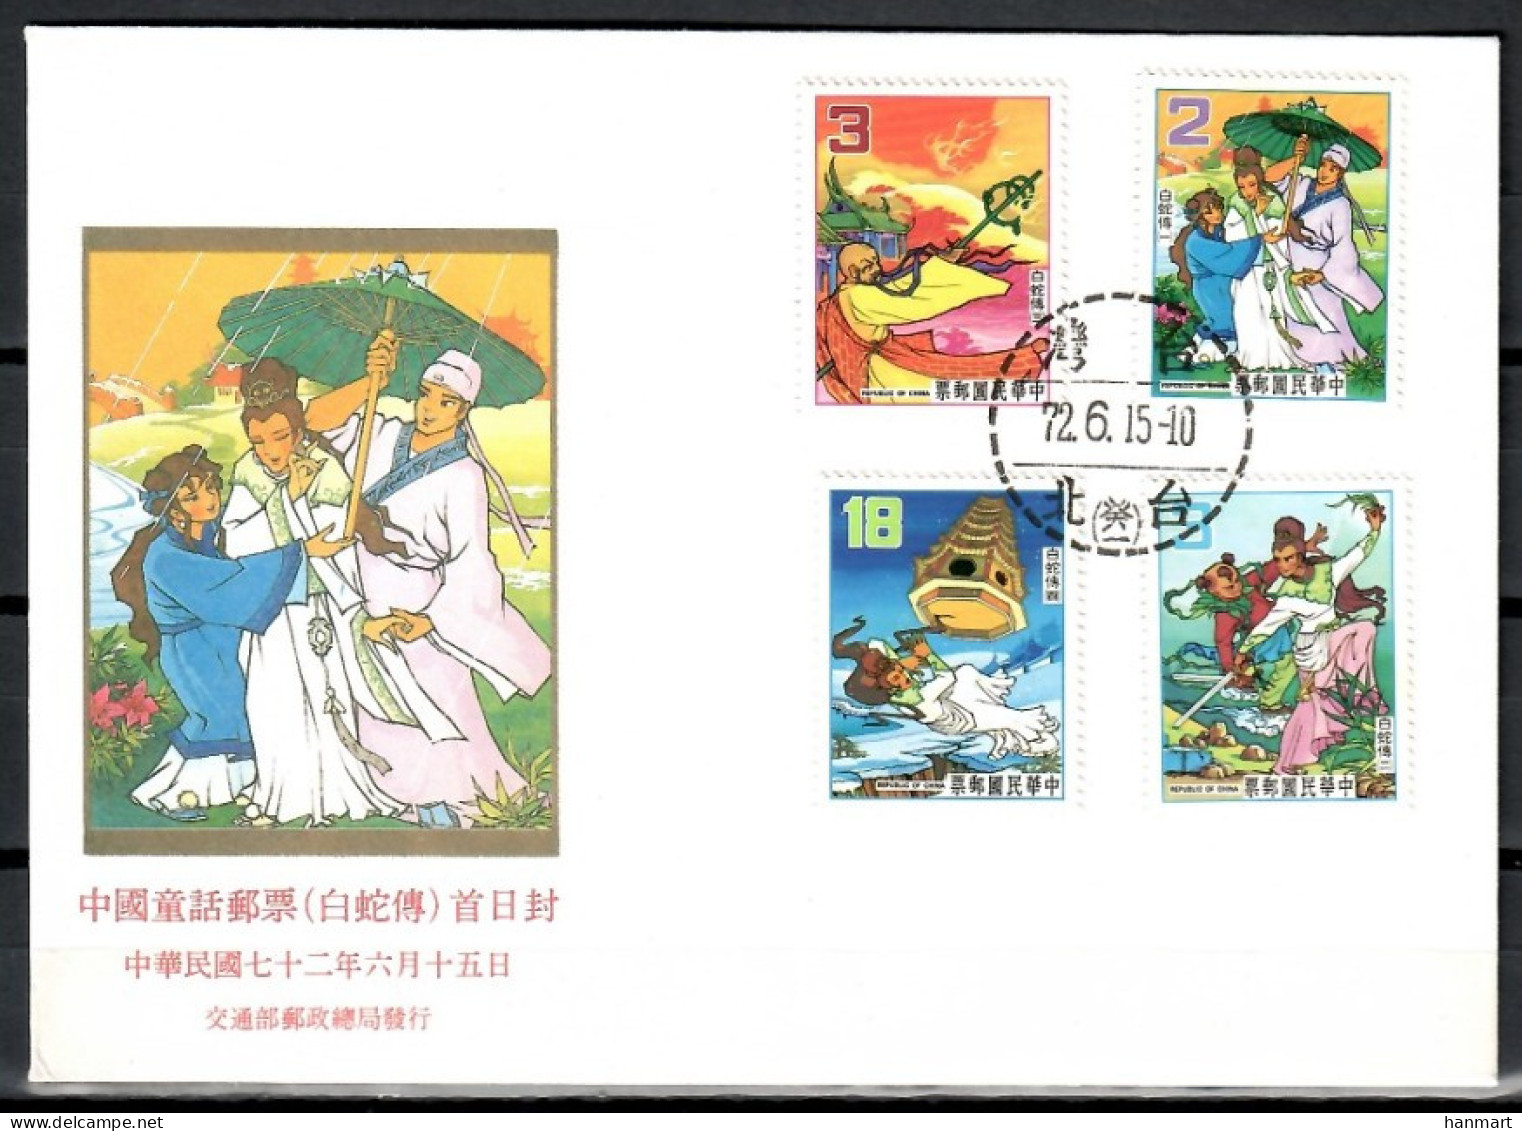 Taiwan (Republic Of China) 1983 Mi 1518-1521 FDC  (FDC ZS9 FRM1518-1521b) - Contes, Fables & Légendes